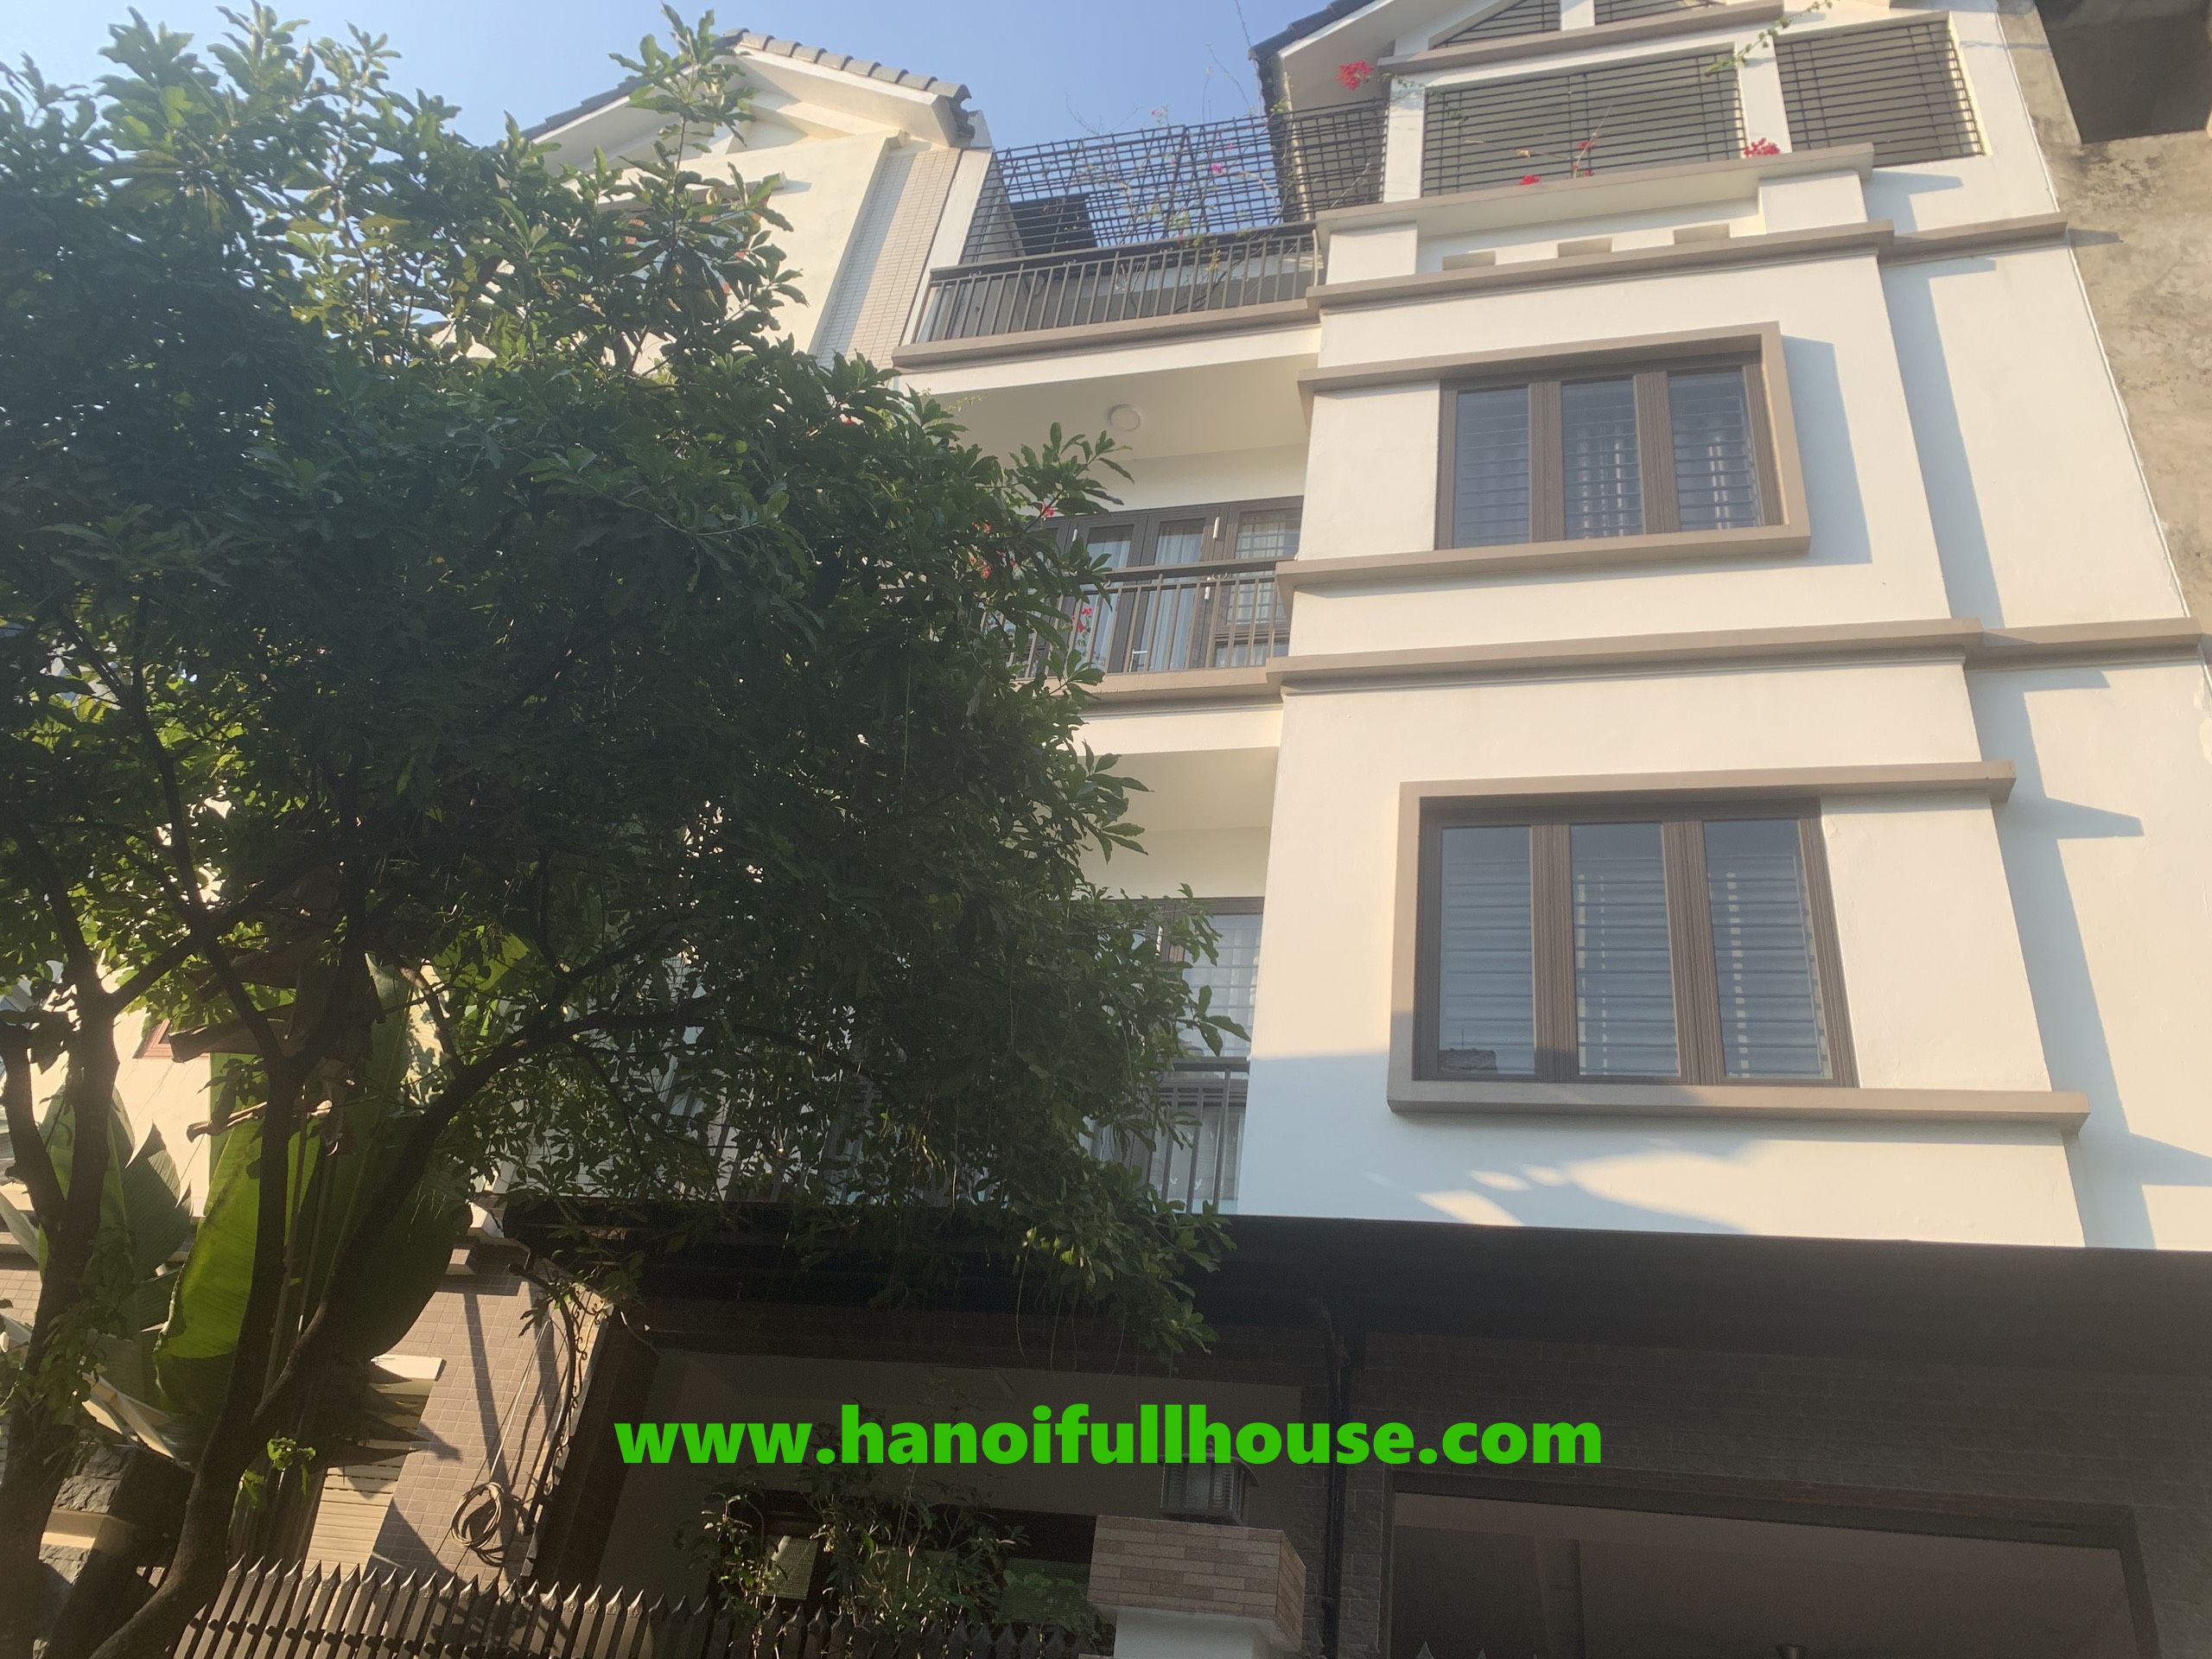 Brandnew, luxury 4-bedroom house with garage in Thach Ban urban area